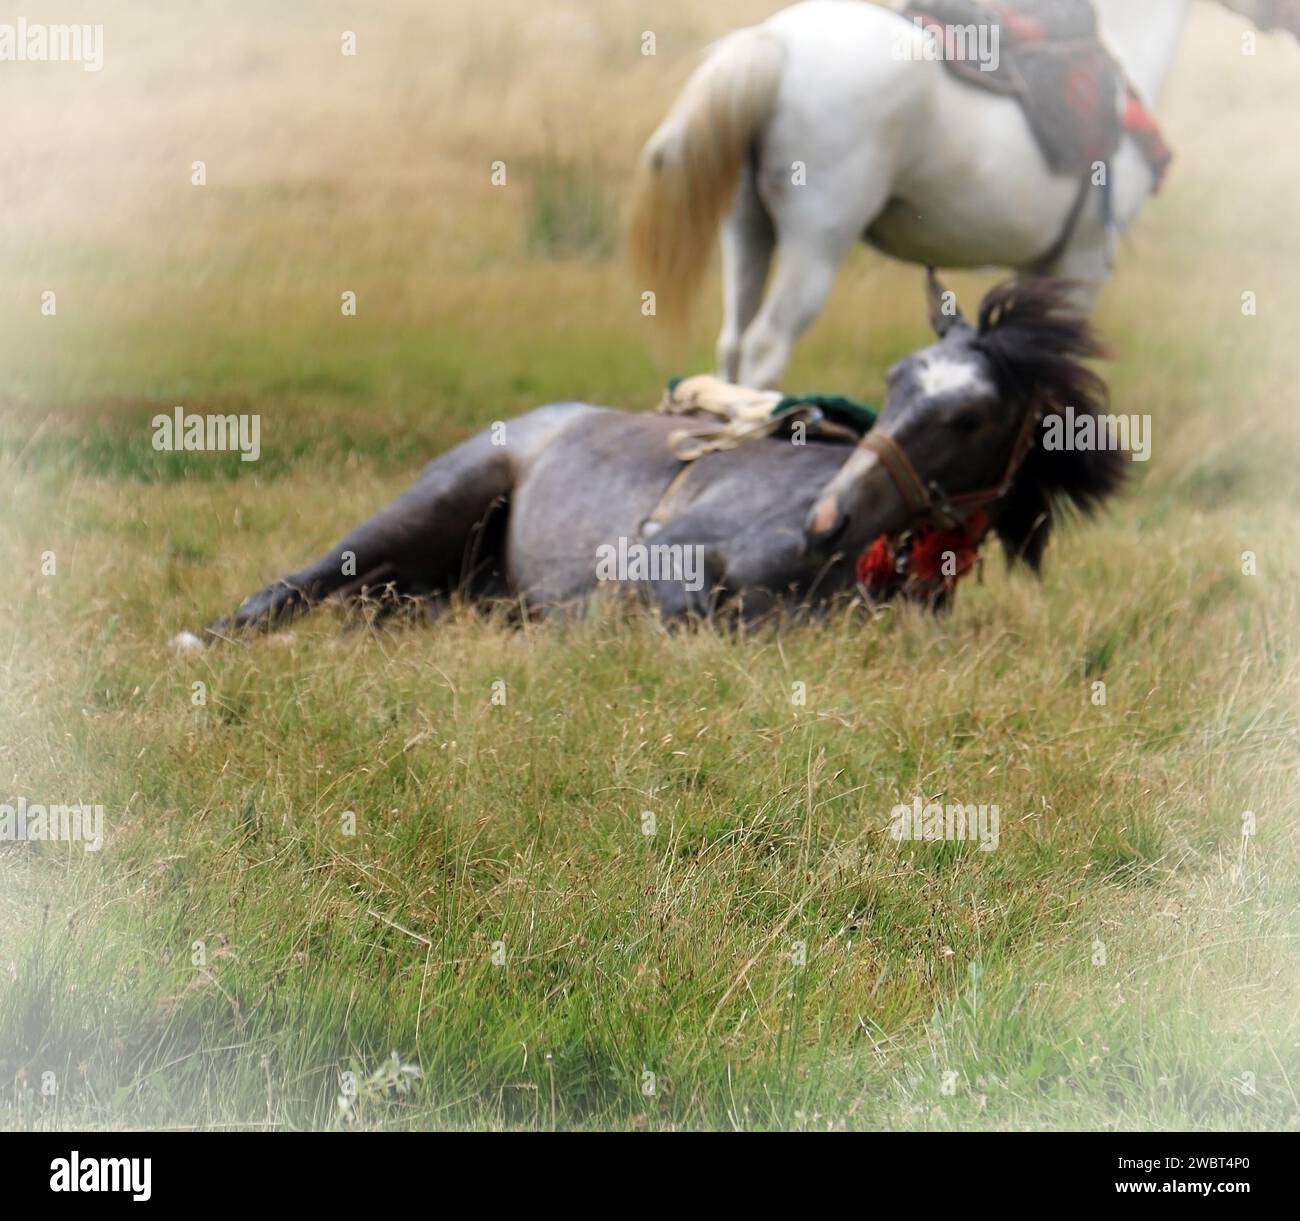 Dreamlike scene of a black horse rolling in the grass and a white horse standing behind, intentionally out of focus. Stock Photo